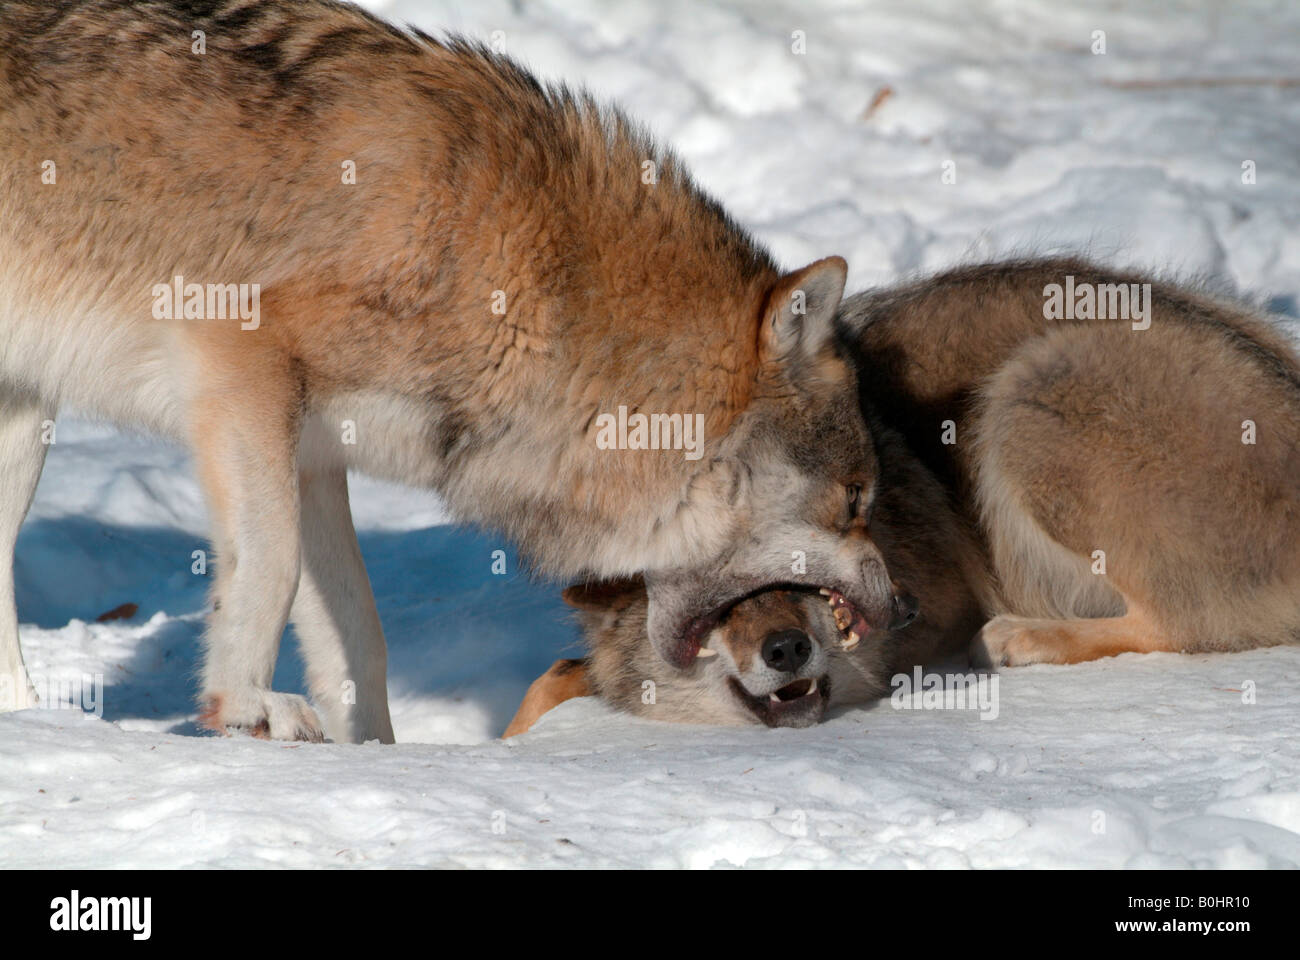 Gray Wolf or Timber Wolf (Canis lupus) biting into the snout of a second wolf, Bavarian Forest National Park, Bavaria, Germany, Stock Photo